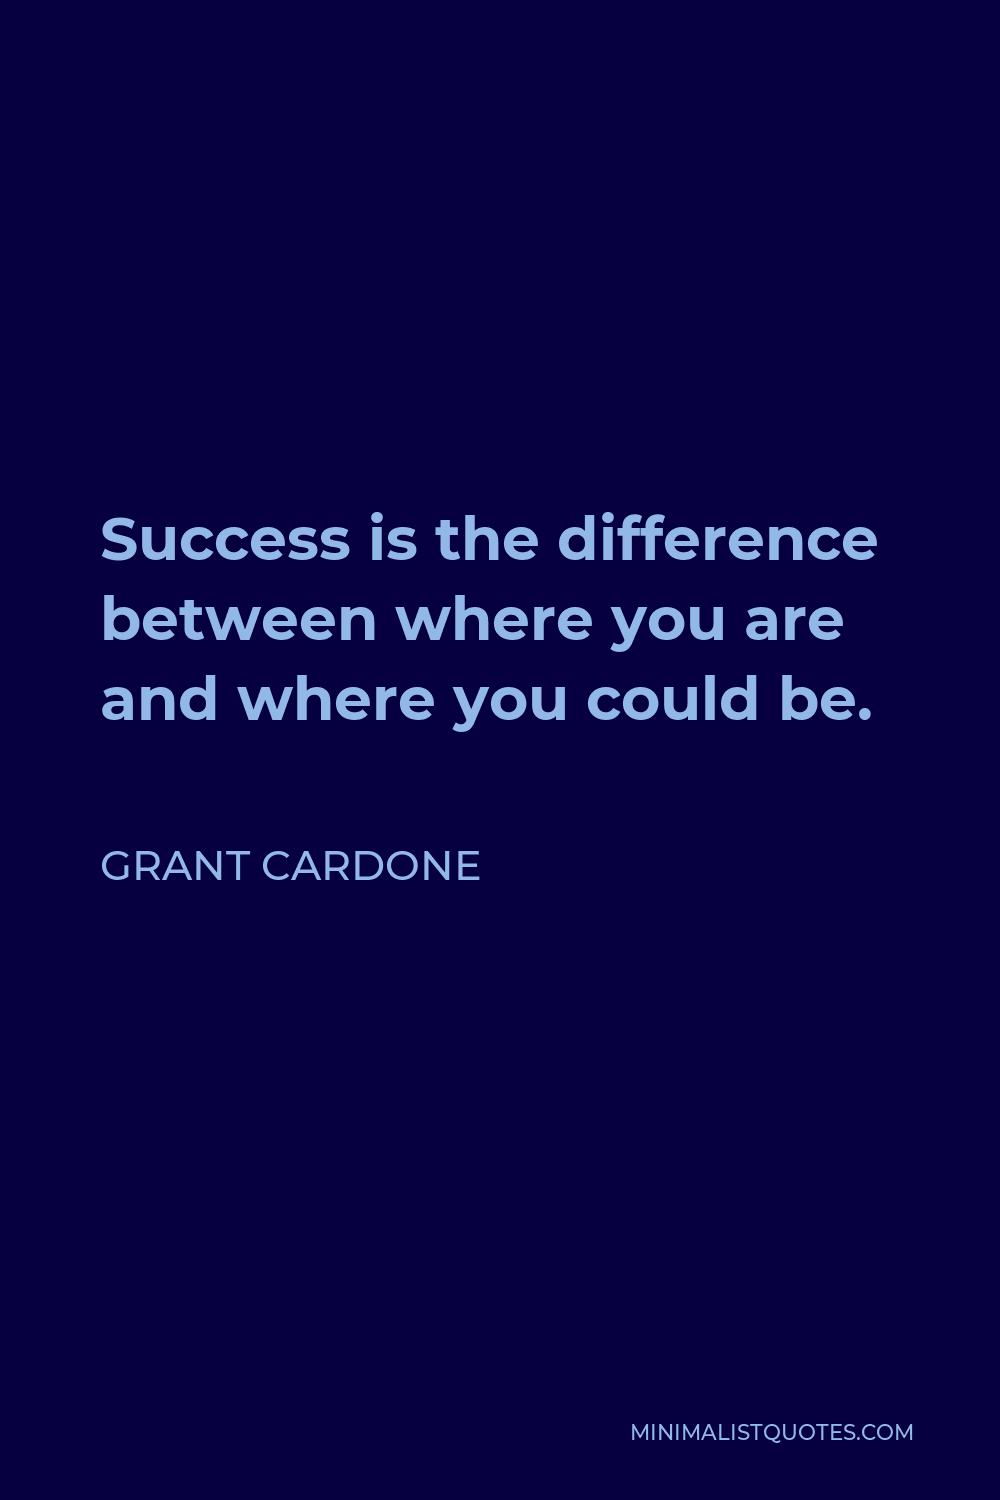 Grant Cardone Quote - Success is the difference between where you are and where you could be.